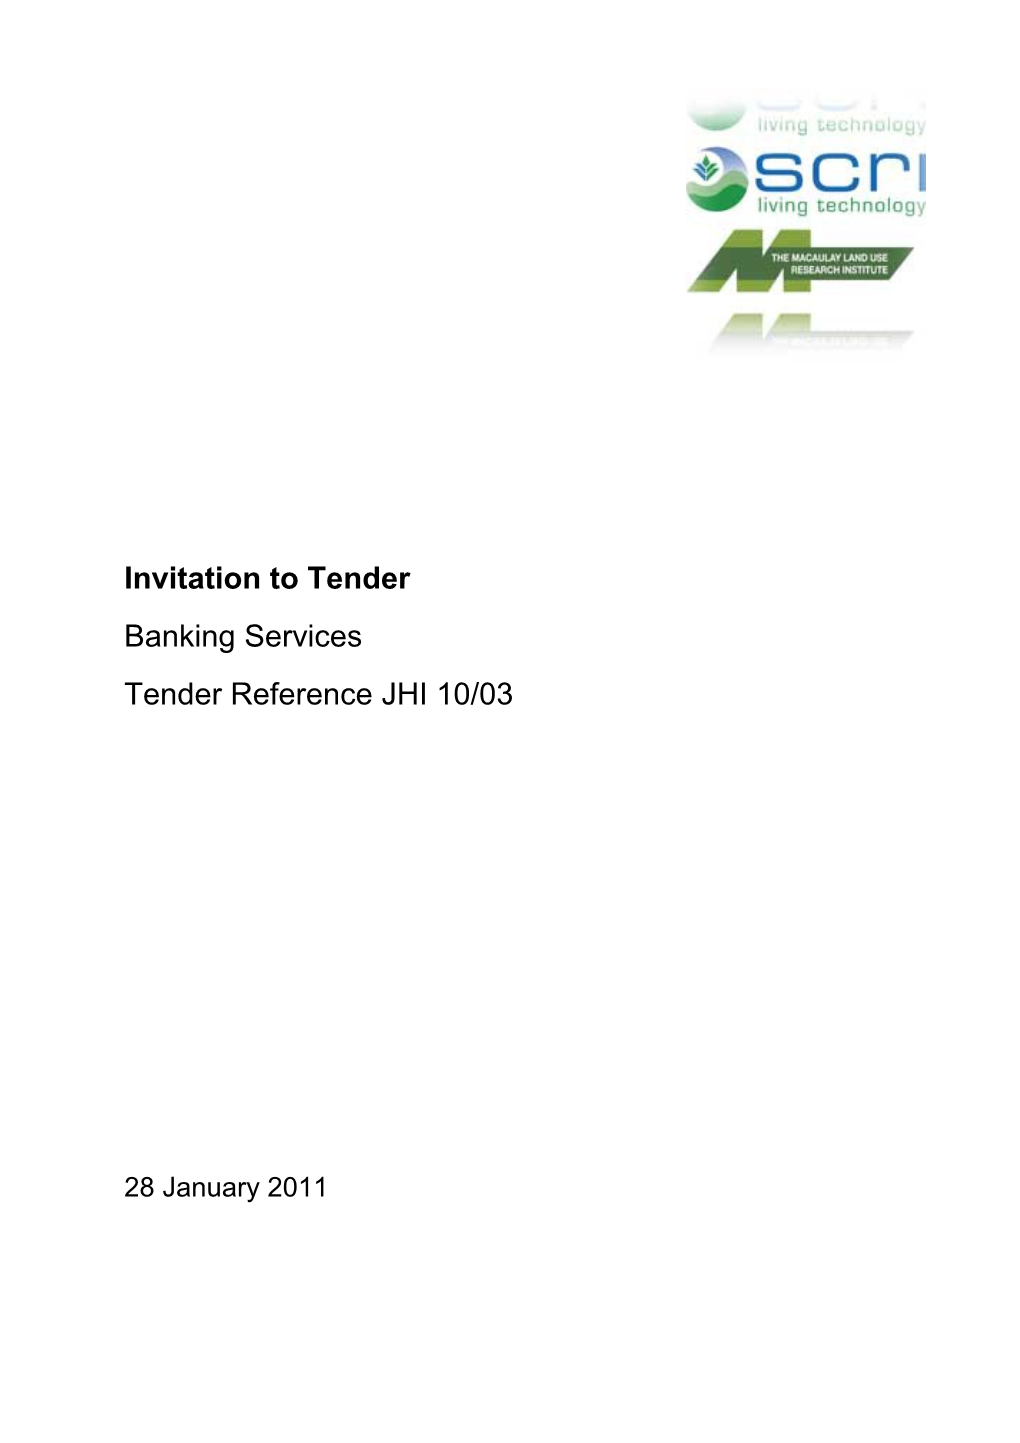 Banking Services Invitation to Tender